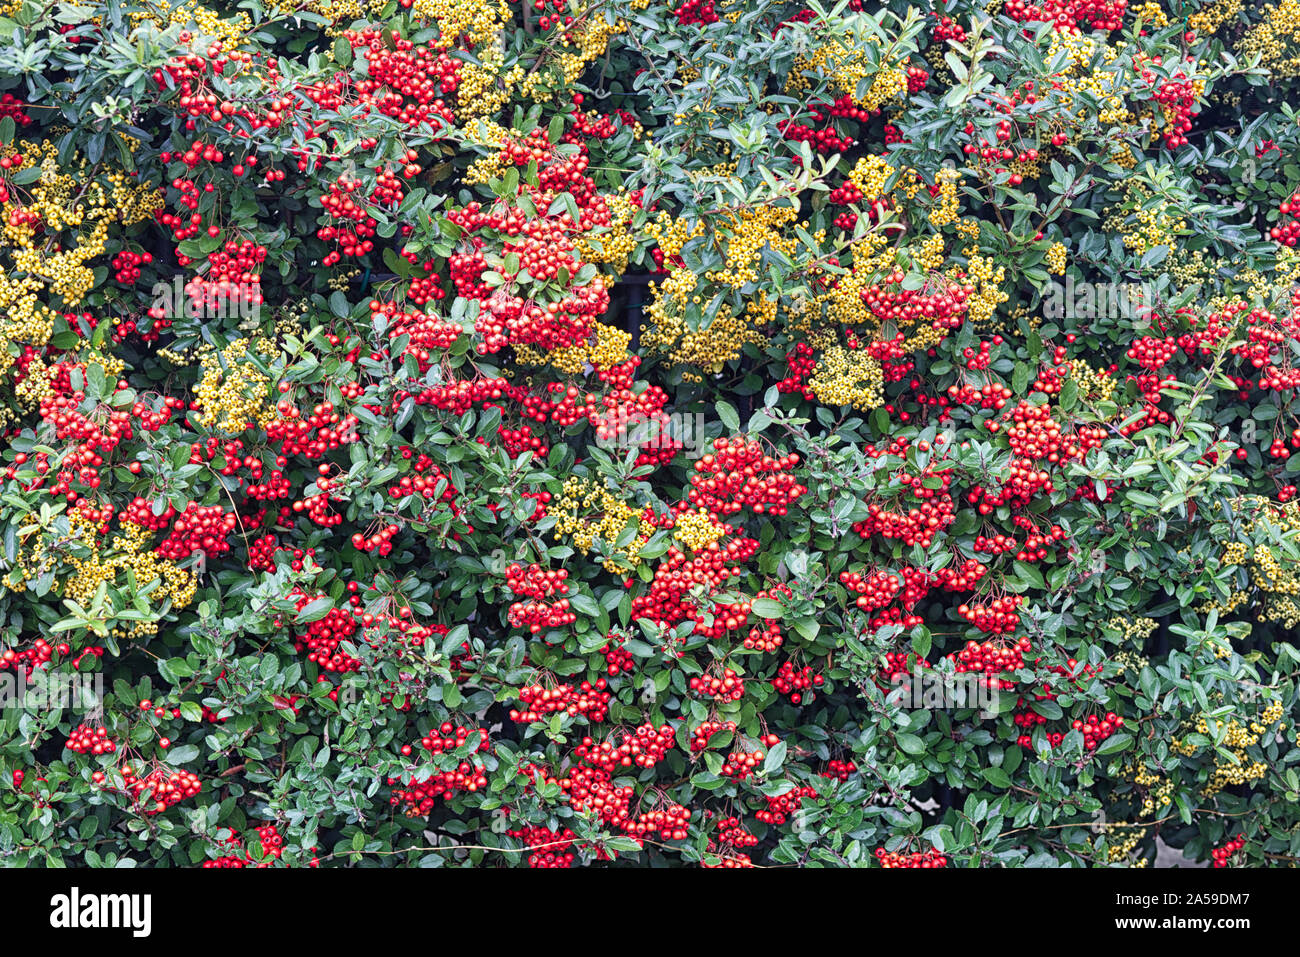 red and yellow berries on a hedge, Pyracantha hedge Stock Photo